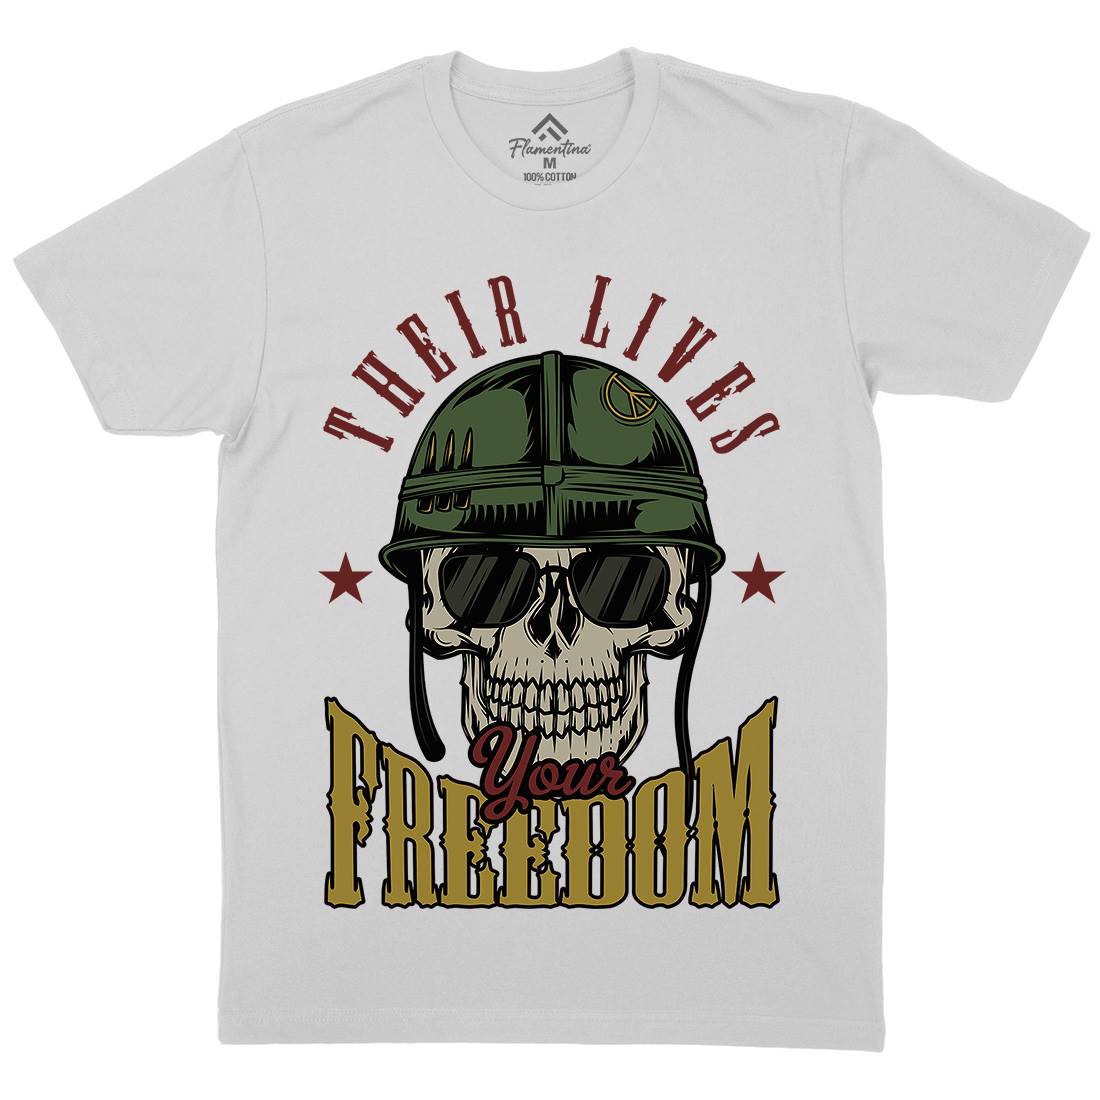 Your Freedom Mens Crew Neck T-Shirt Army C899